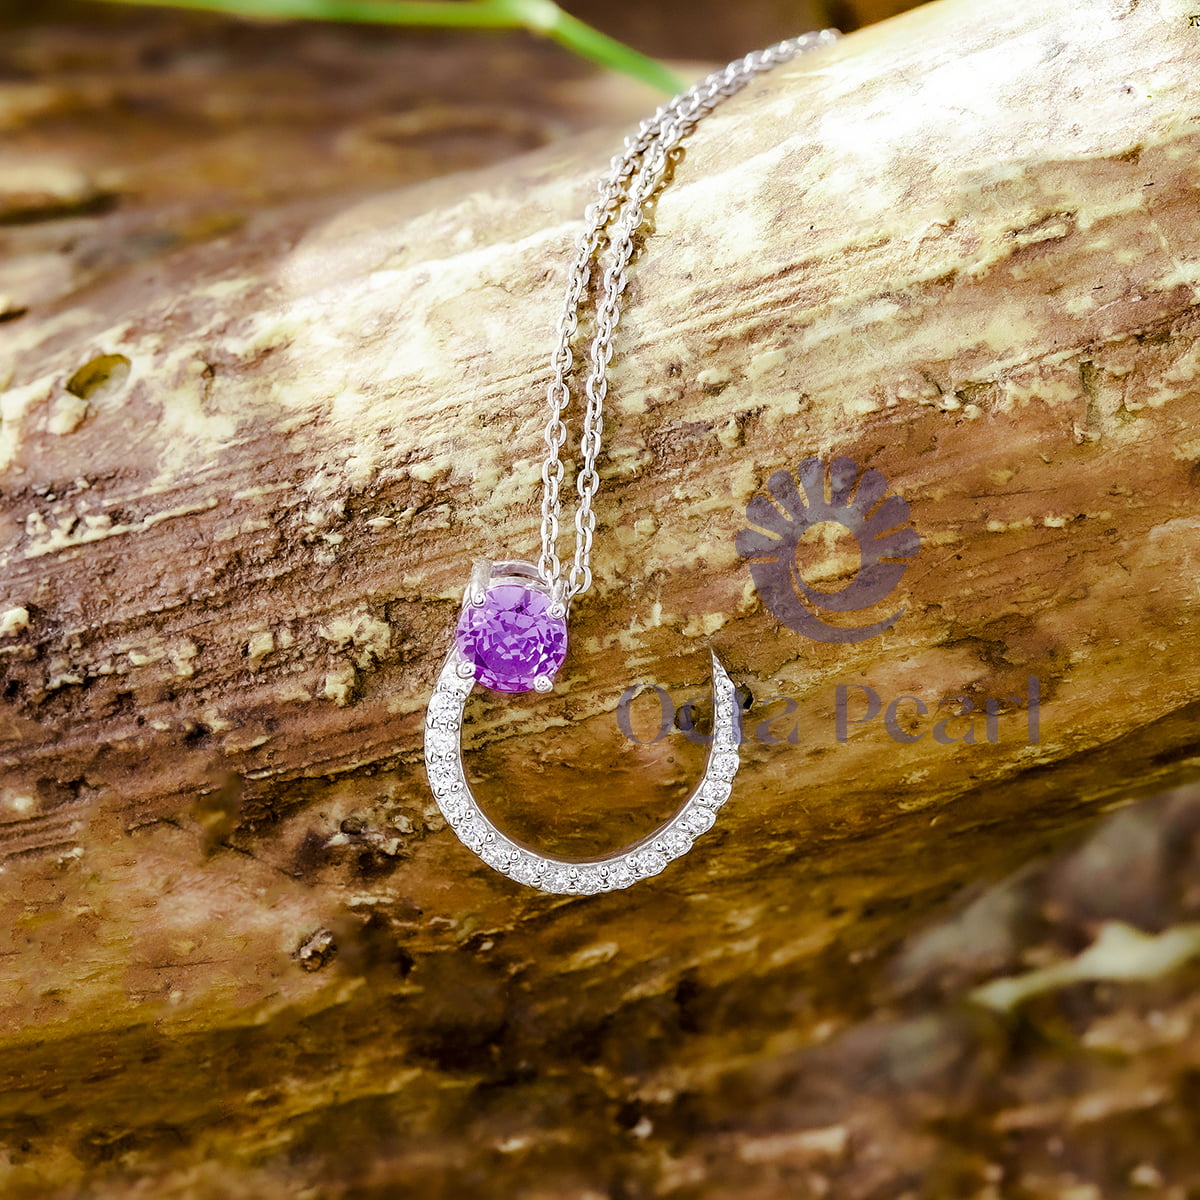 Amethyst With White Round CZ Stone Half Moon Style Dainty Pendant For Birthday Gift